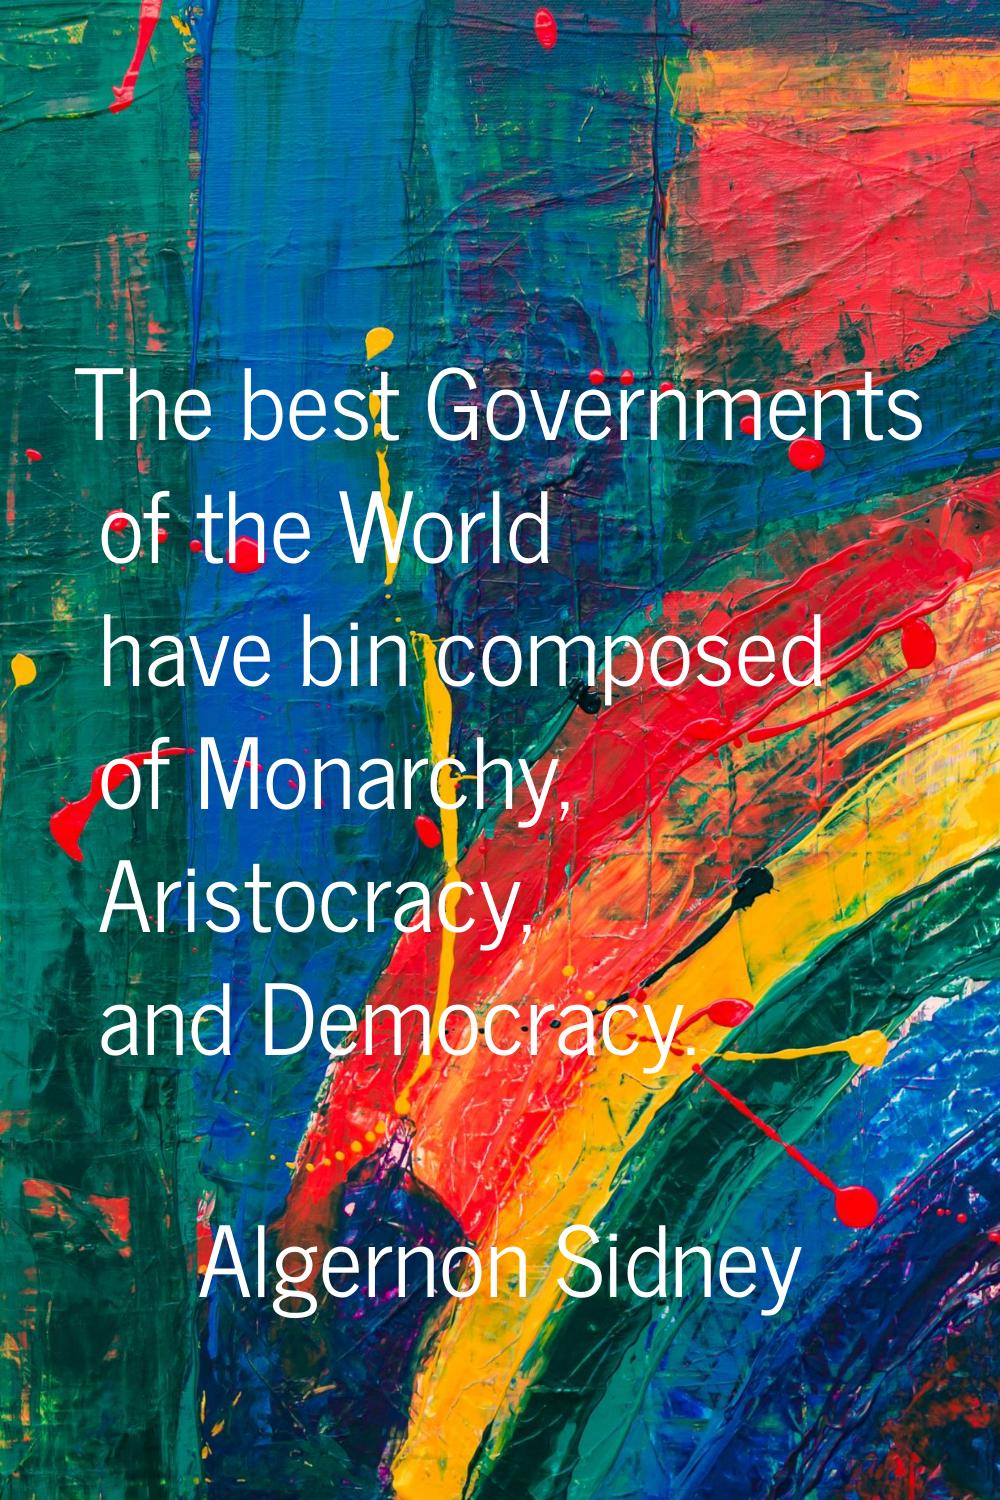 The best Governments of the World have bin composed of Monarchy, Aristocracy, and Democracy.